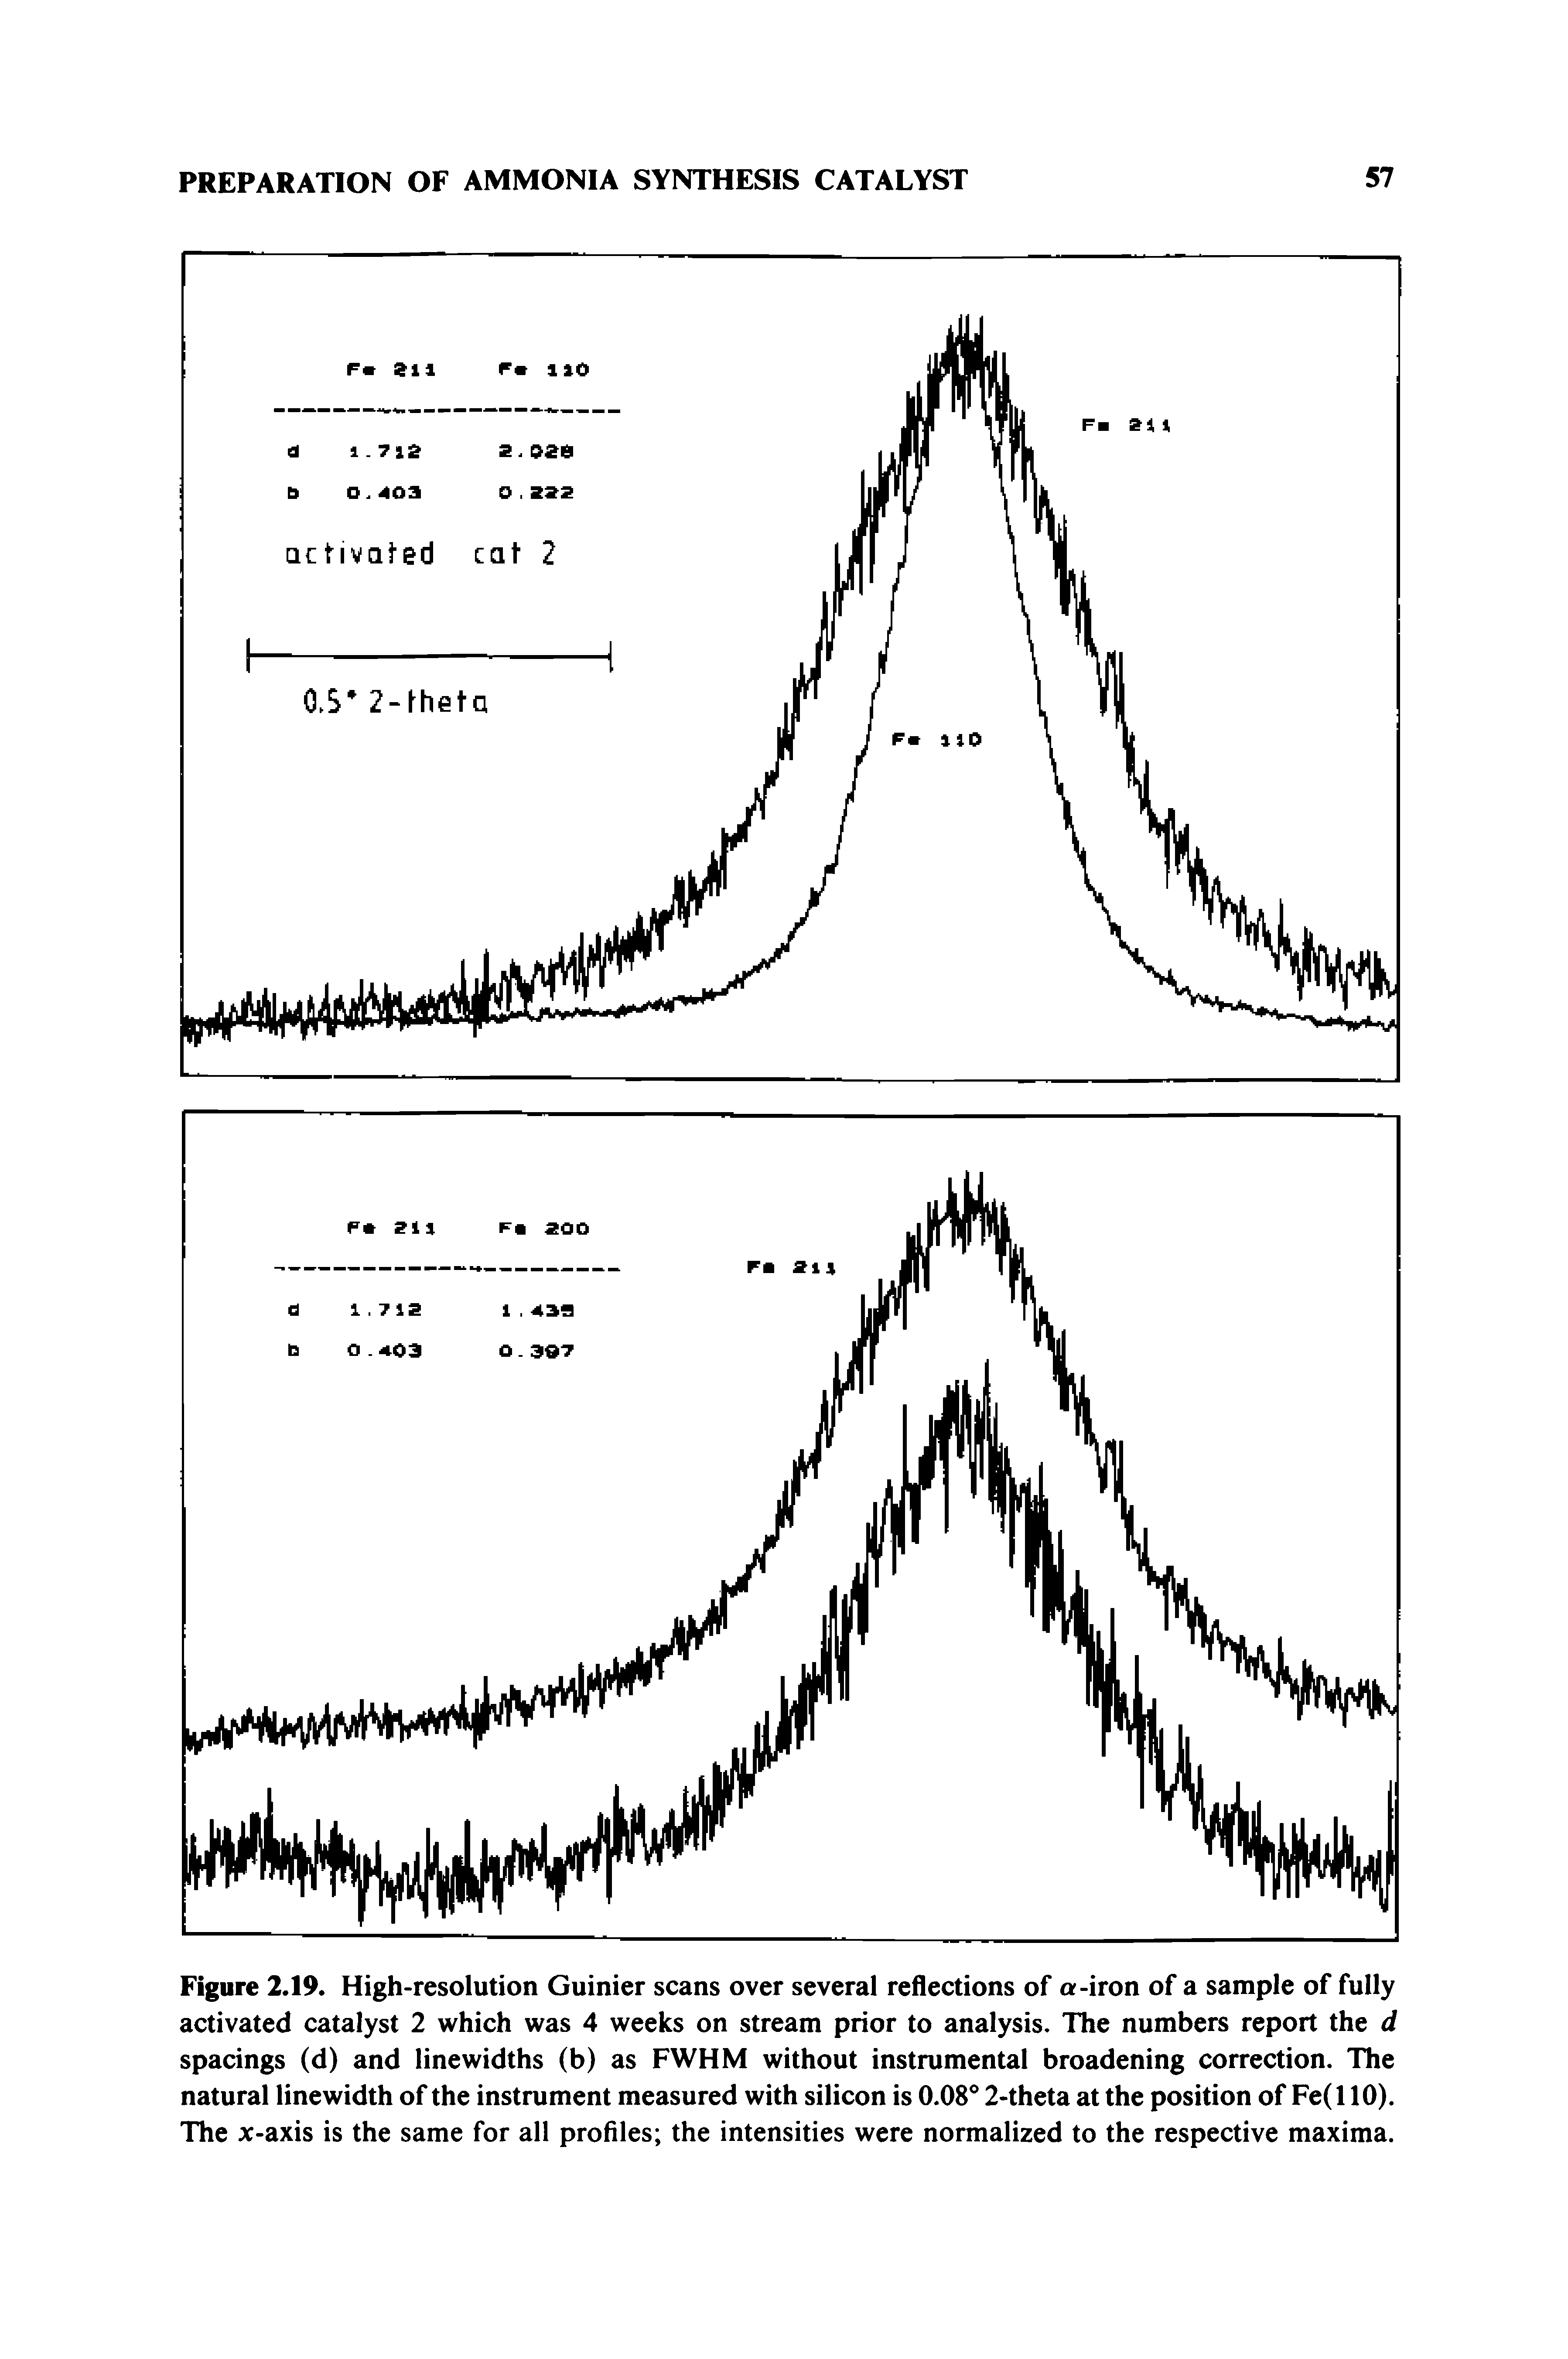 Figure 2.19. High-resolution Guinier scans over several reflections of a-iron of a sample of fully activated catalyst 2 which was 4 weeks on stream prior to analysis. The numbers report the d spacings (d) and linewidths (b) as FWHM without instrumental broadening correction. The natural linewidth of the instrument measured with silicon is 0.08 2-theta at the position of Fe(l 10). The x-axis is the same for all profiles the intensities were normalized to the respective maxima.